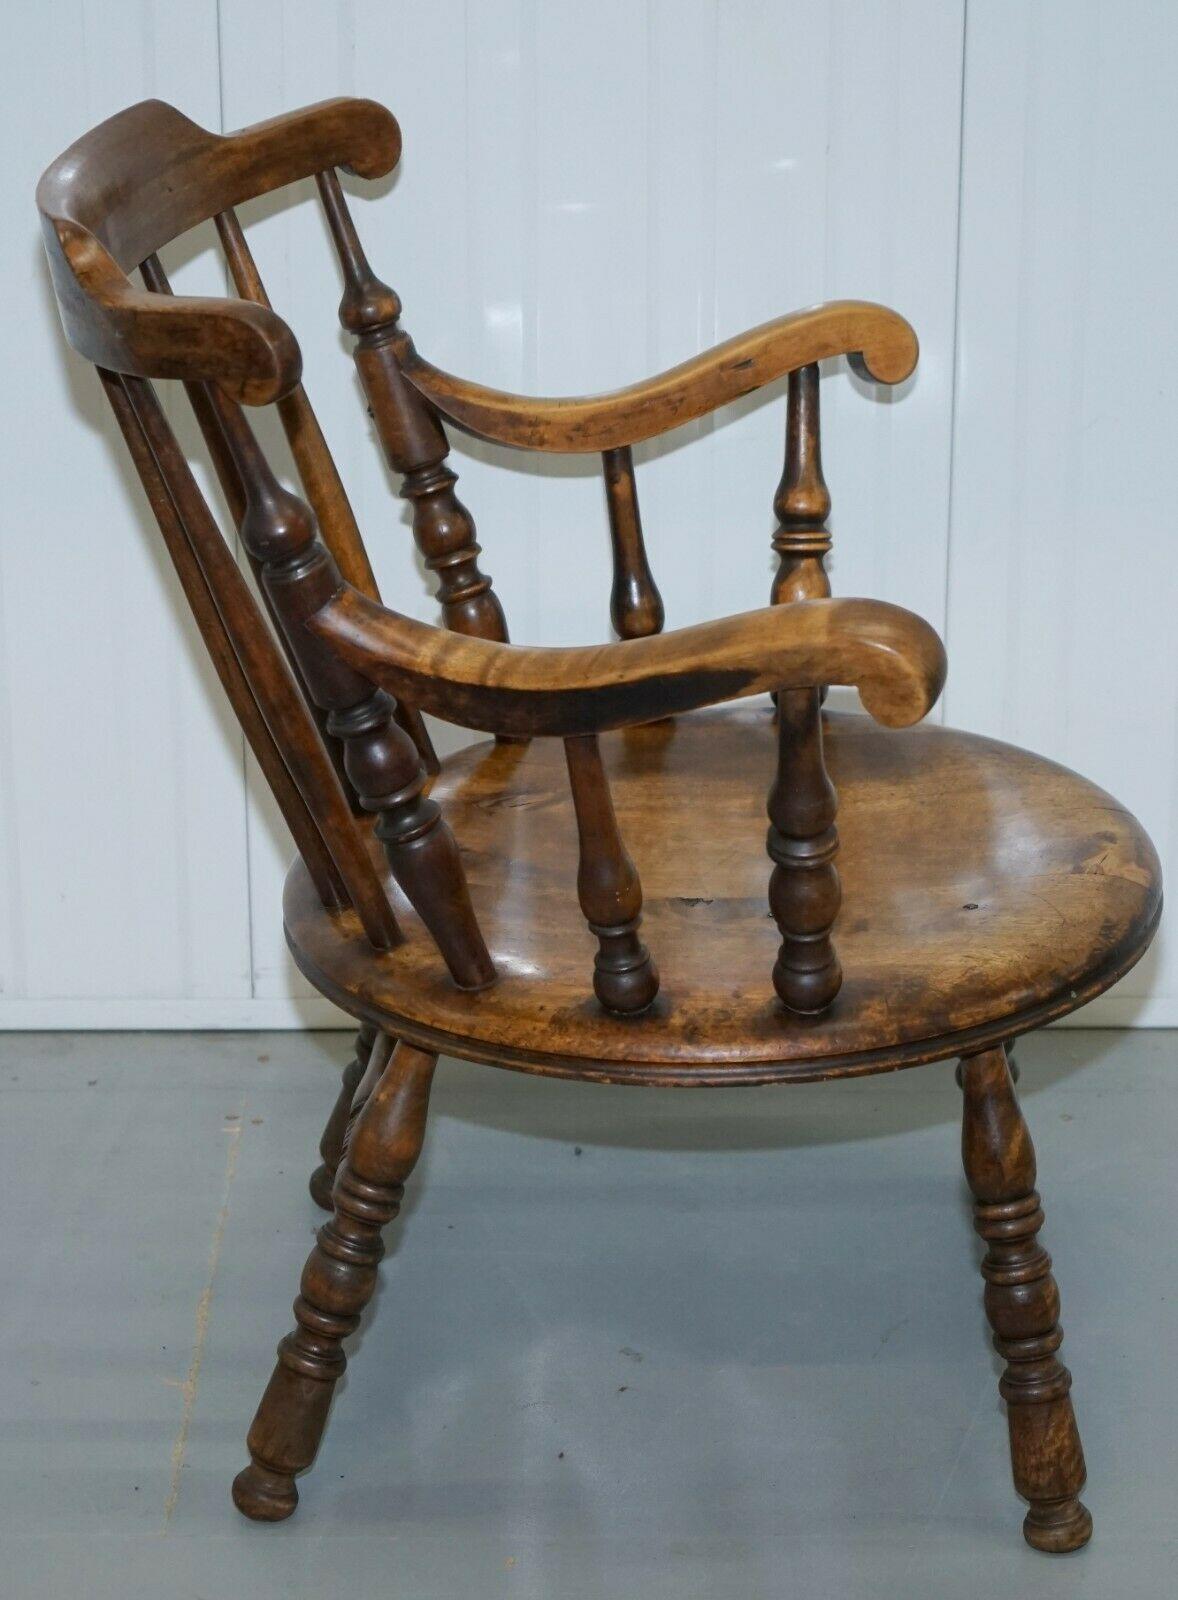 We are delighted to offer for sale this gorgeous Windsor beechwood chair on reel legs.

This is such a pretty little chair. The wood used to make it it’s just lovely, both front legs seem to be from different types of wood, then again this is just